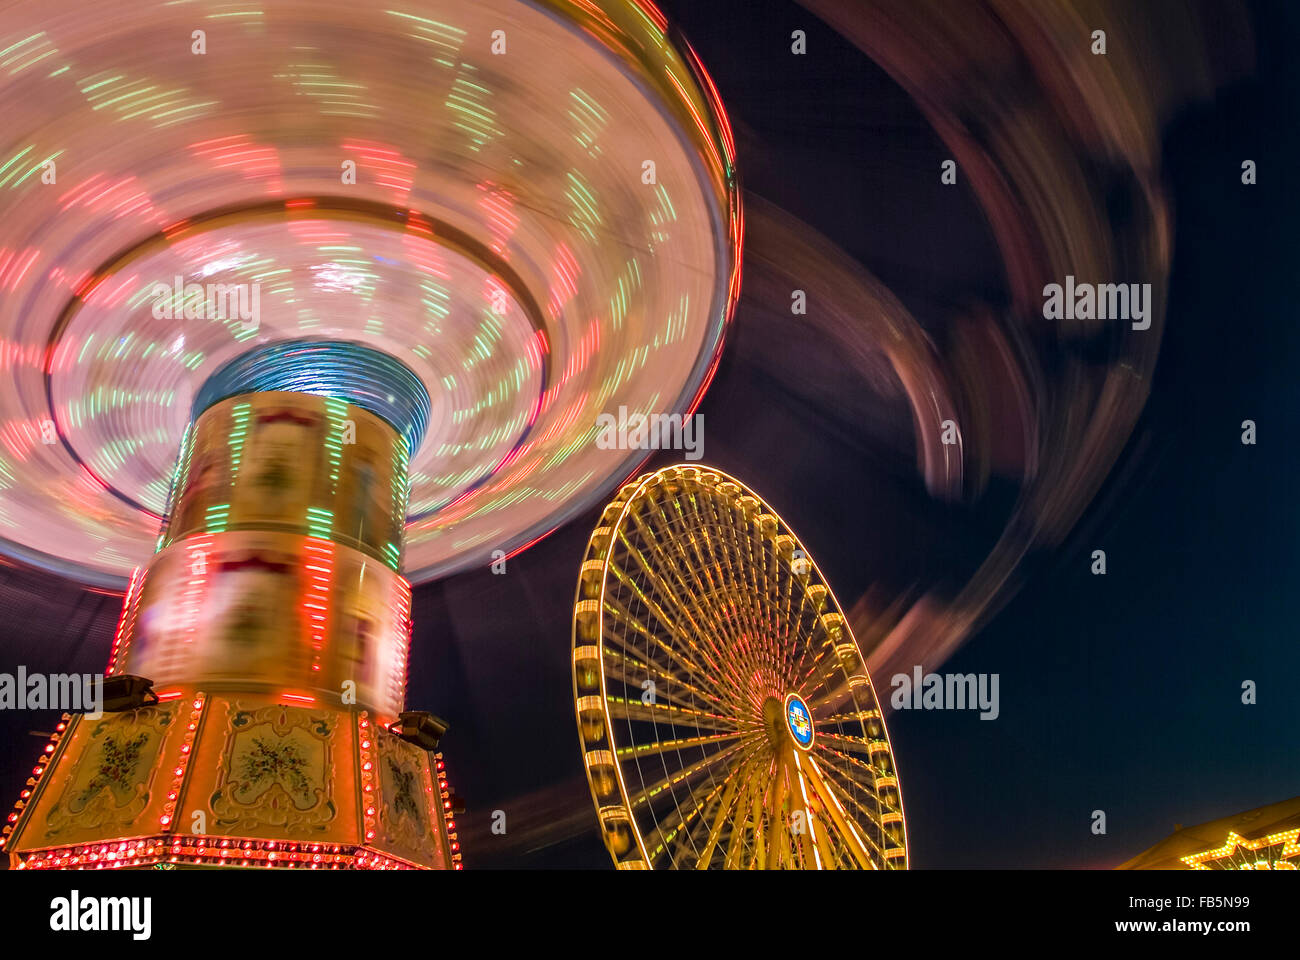 Funfair with giant wheel and merry go round in motion evening light germany europe Stock Photo